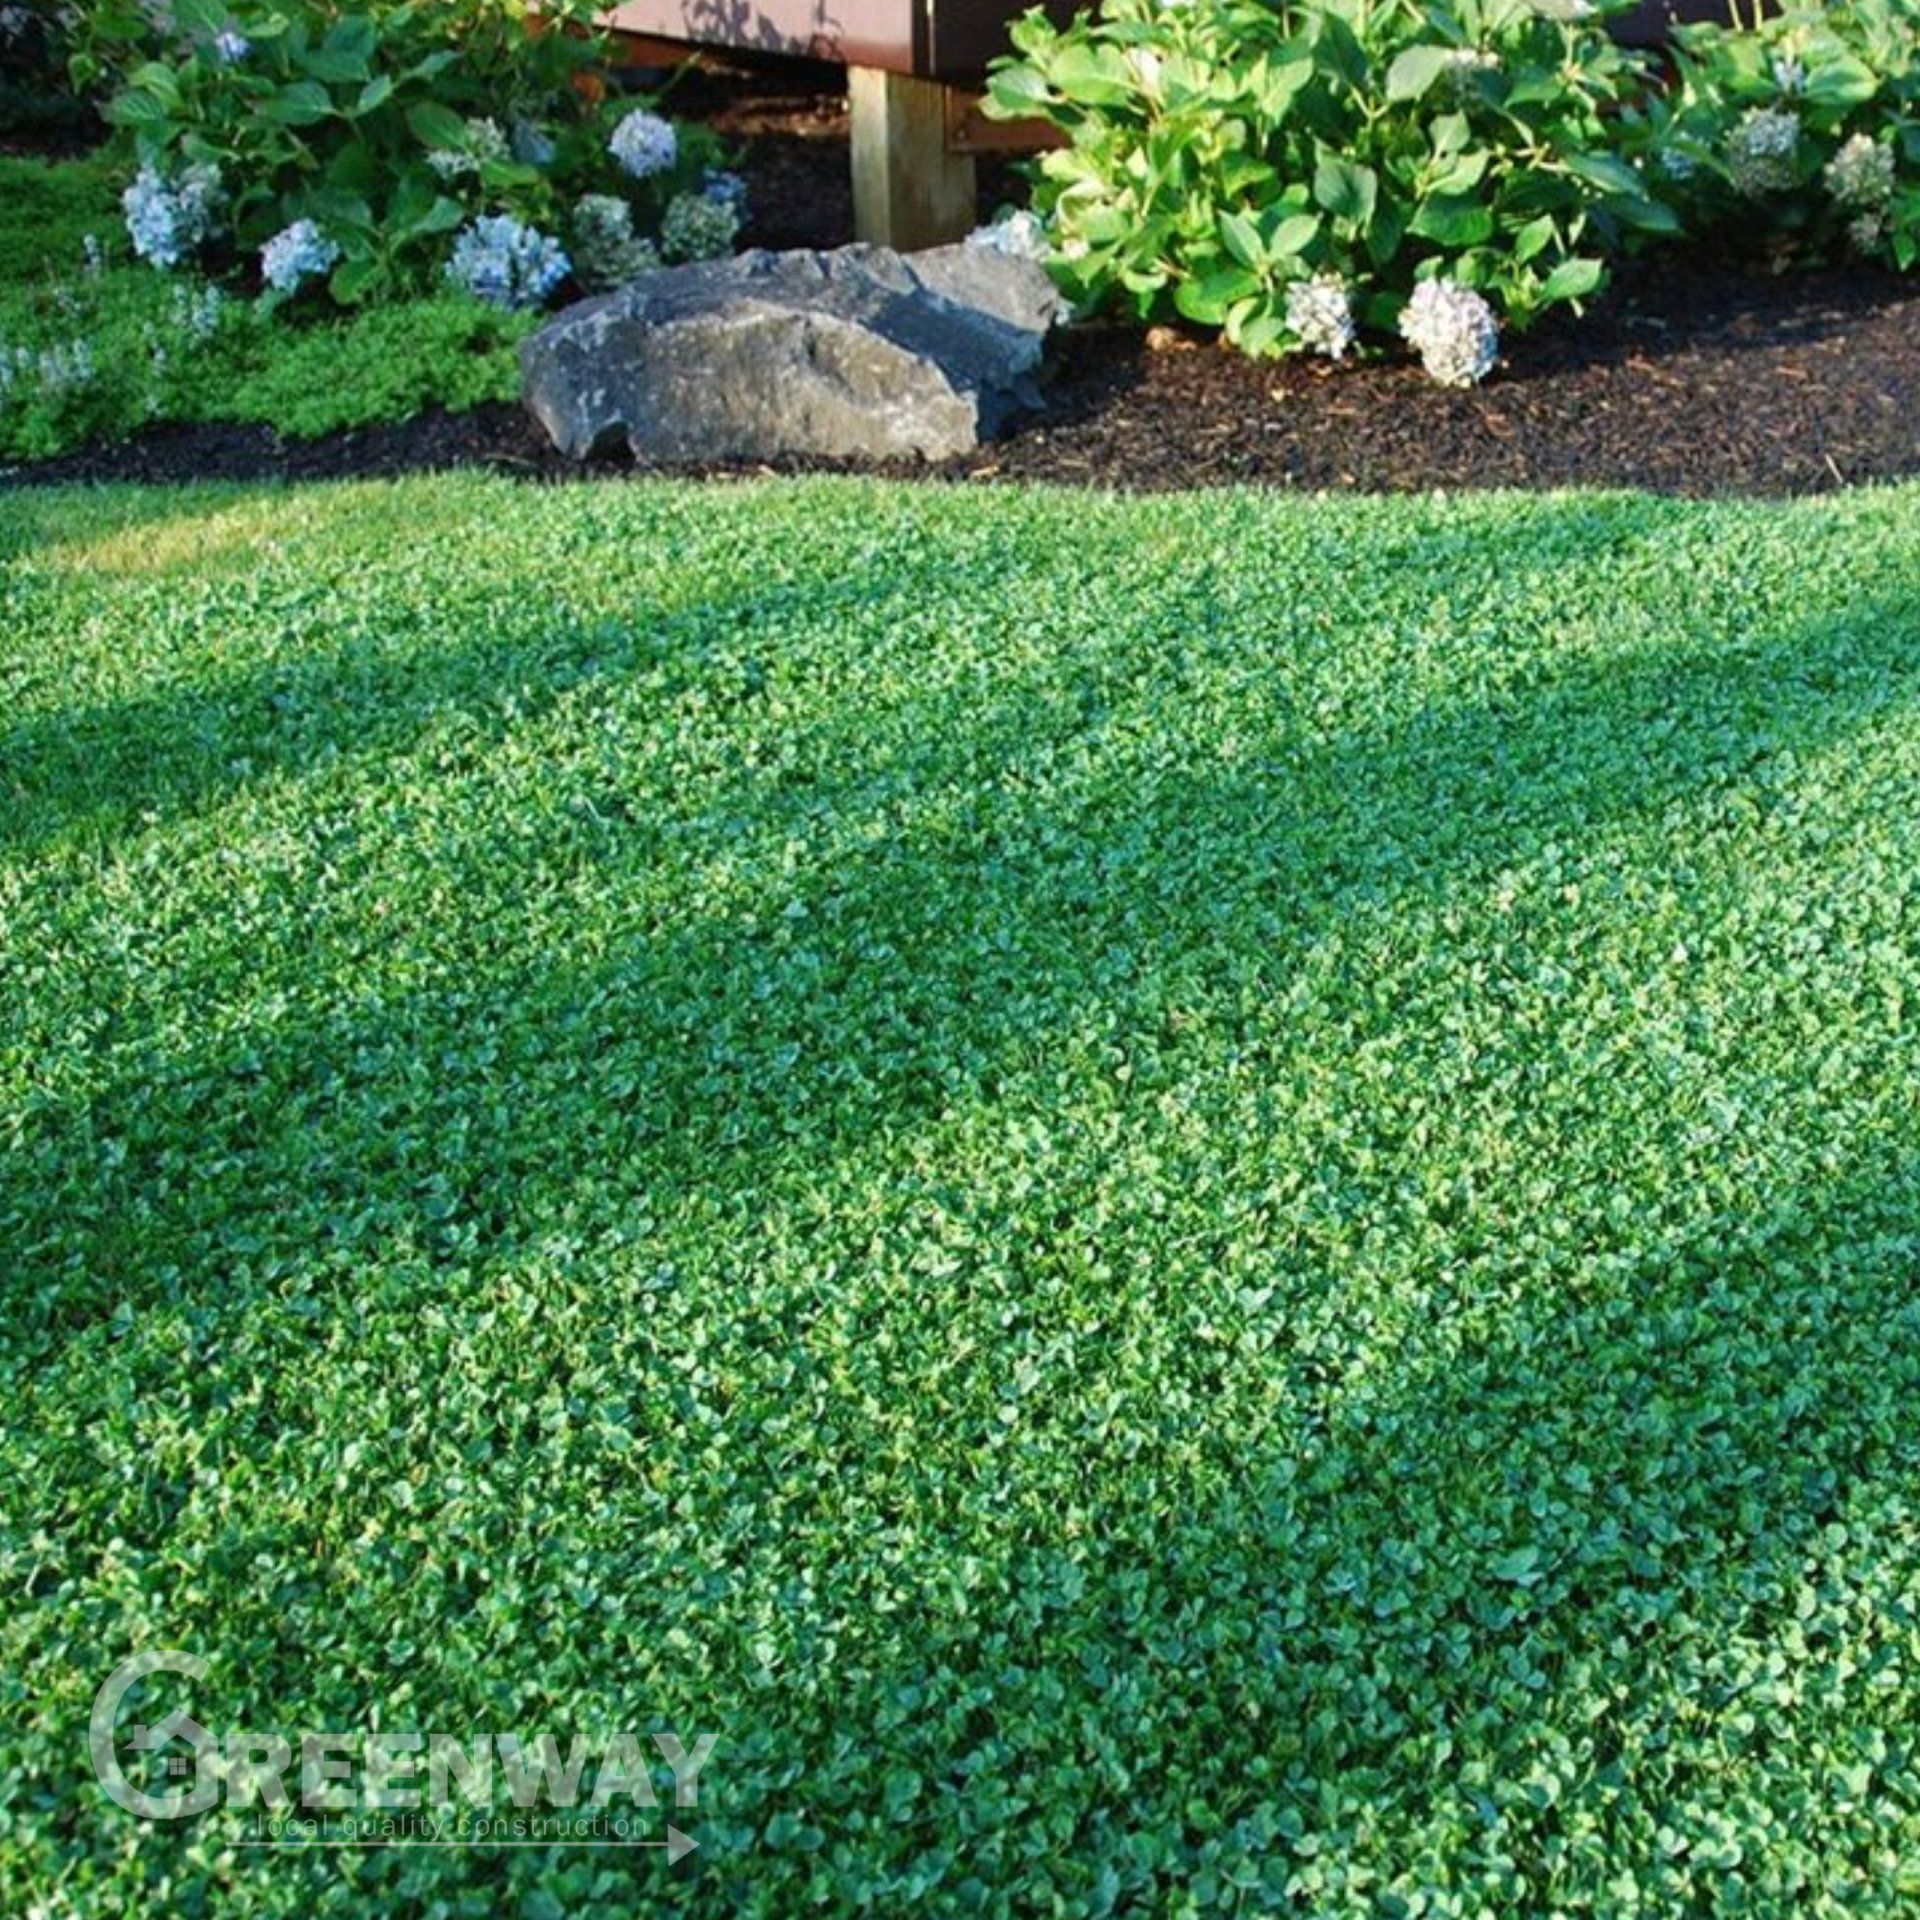 Greenway Micro Clover Lawn